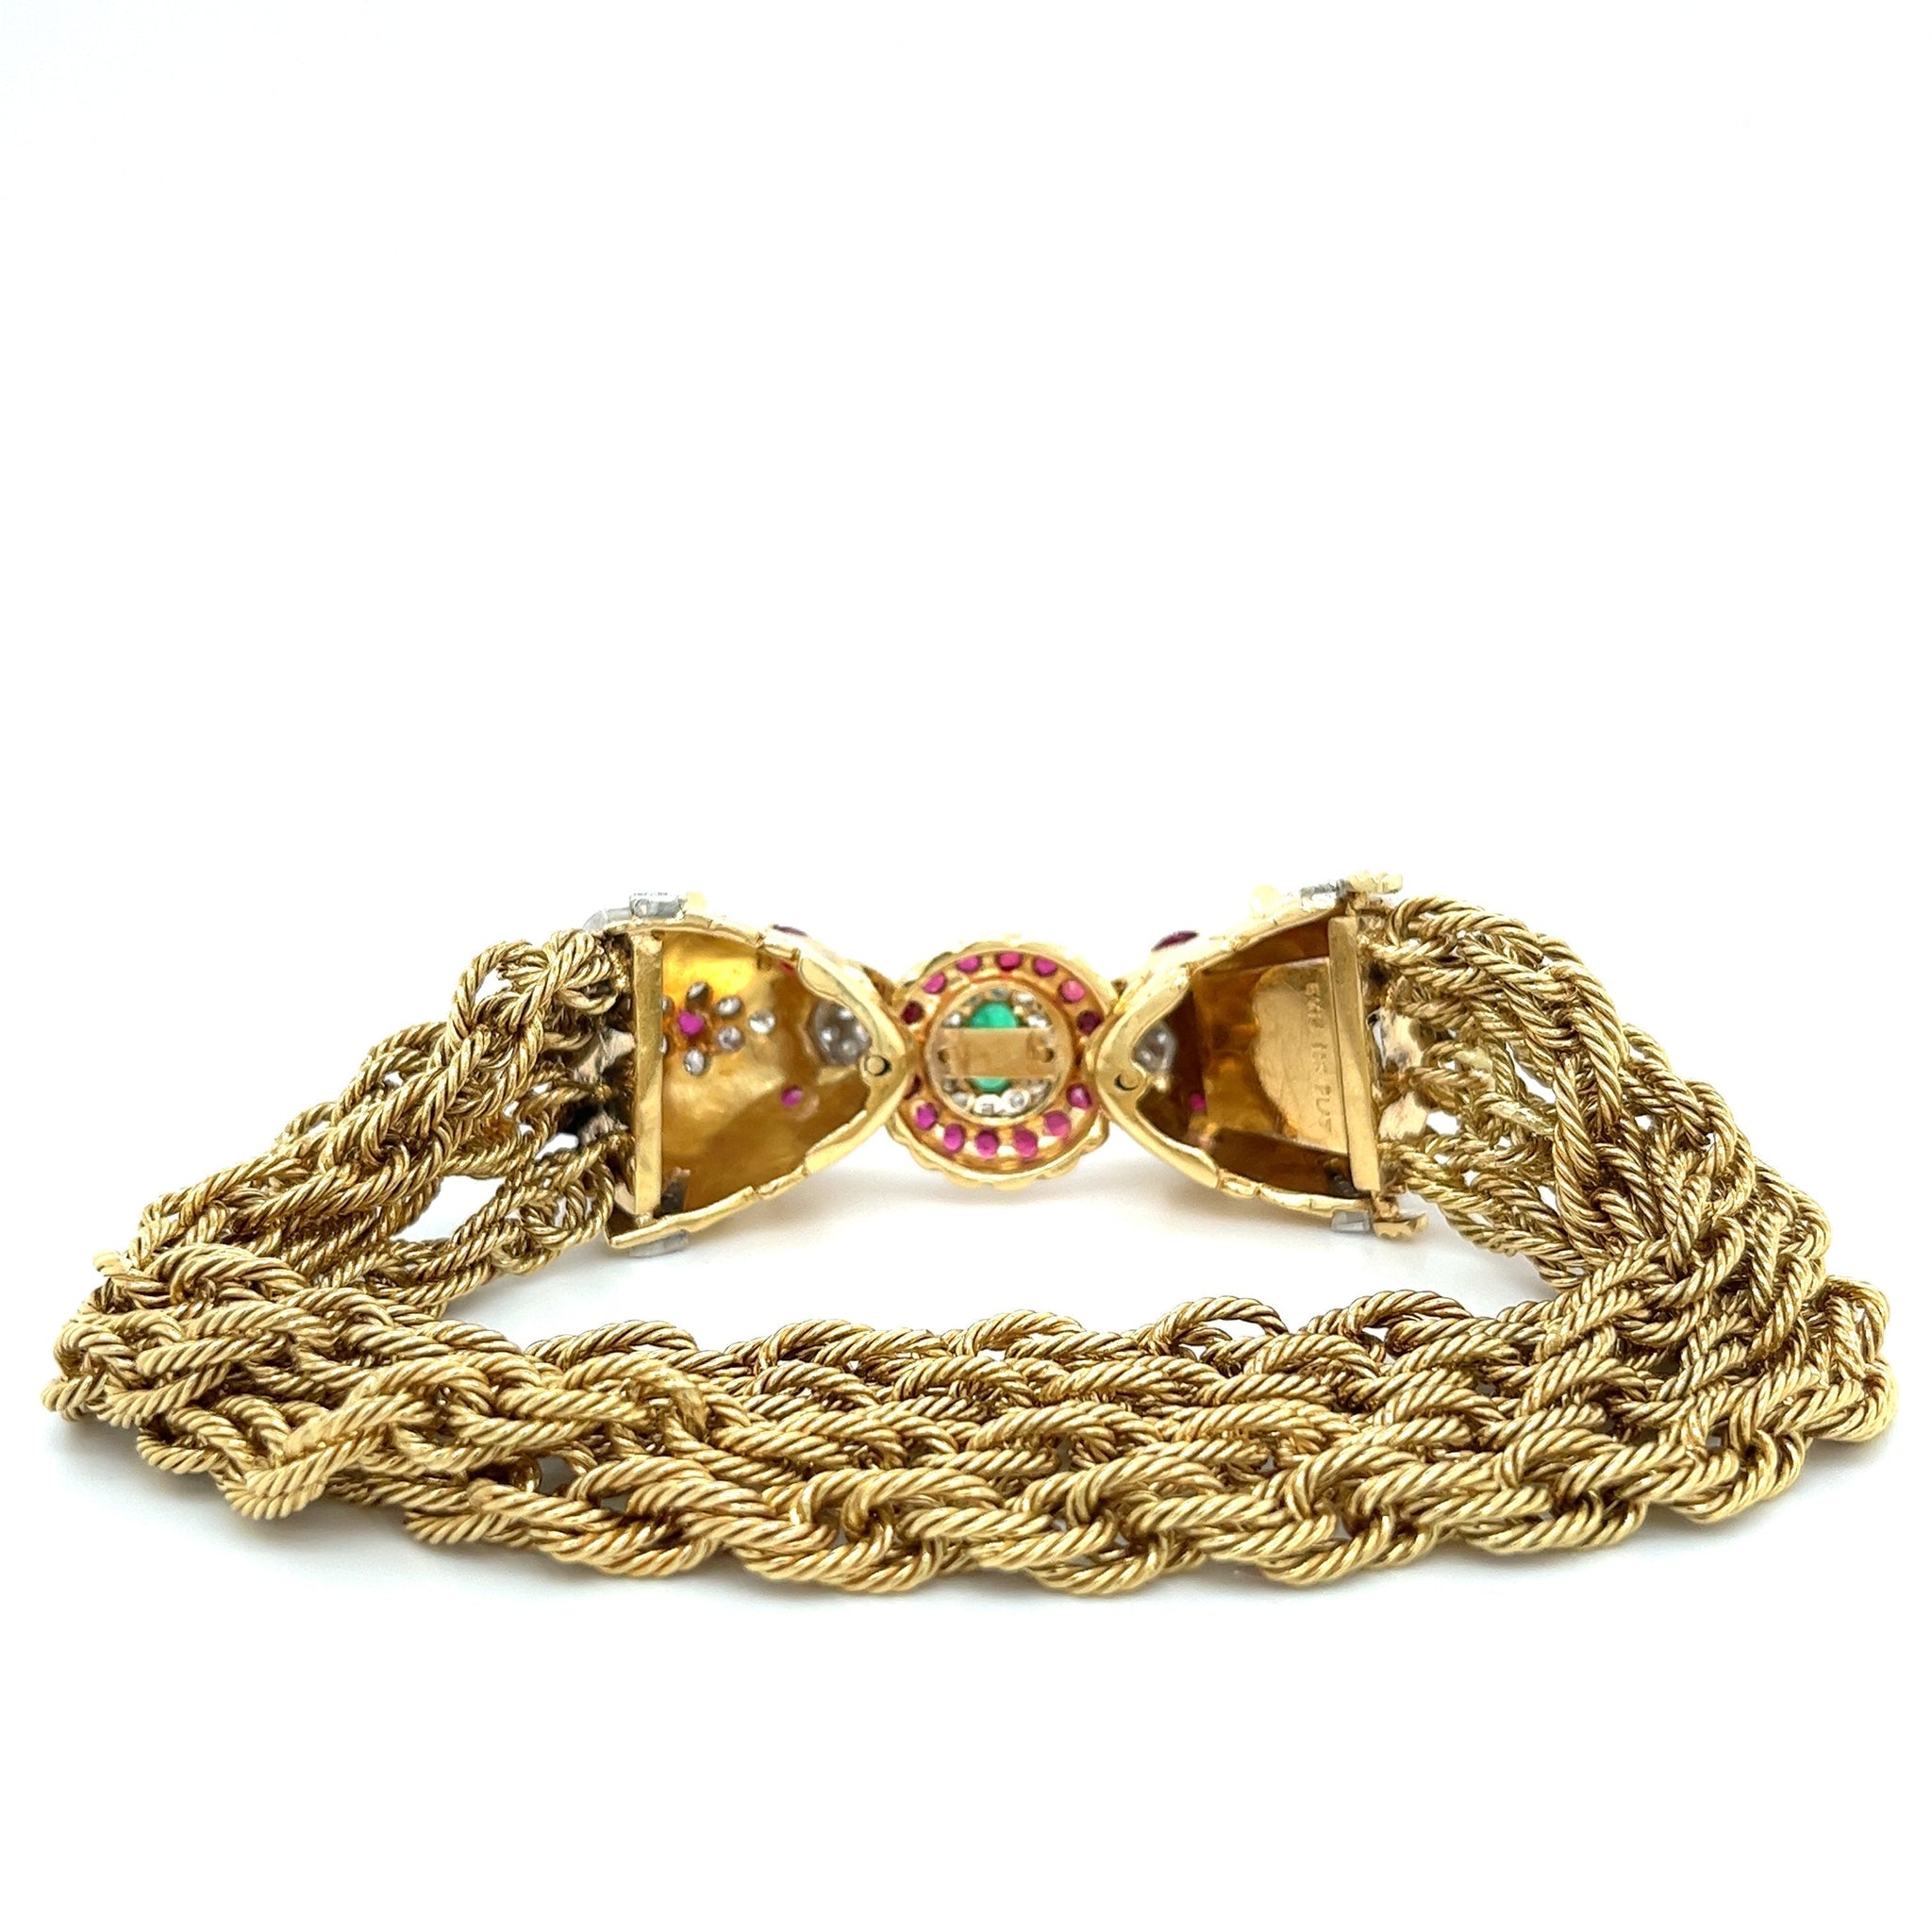 18K Gold Platinum Double Headed Biting Lion Multi Rope Chain Bracelet With Emeralds Diamonds Rubies Chains